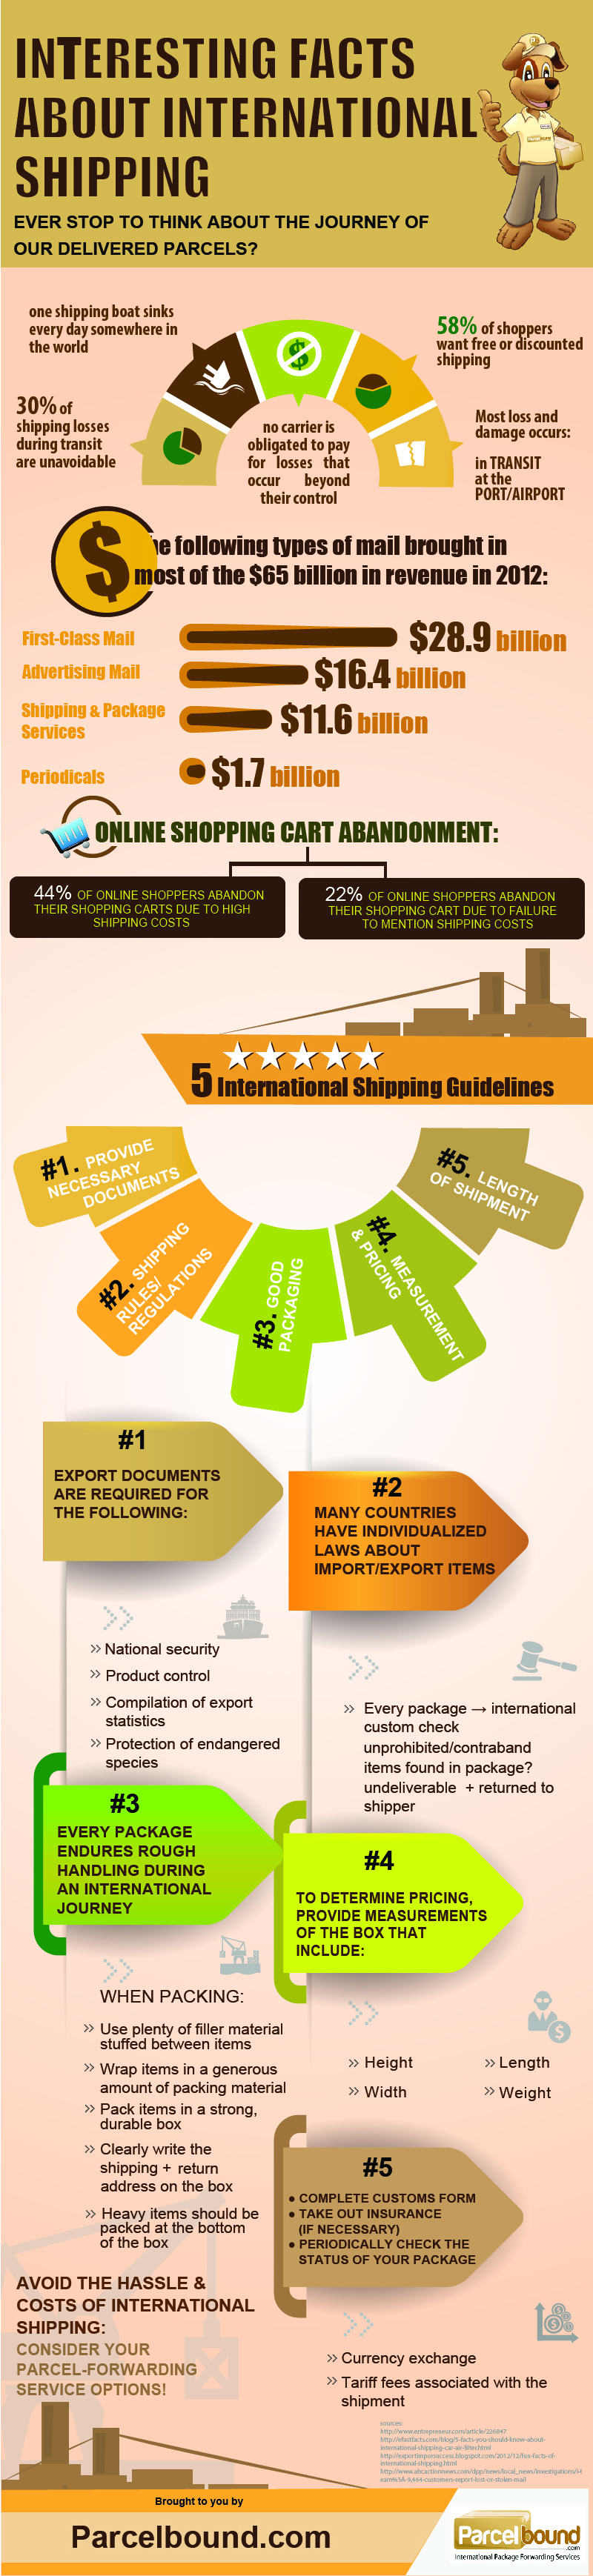 Interesting Facts About International Shipping